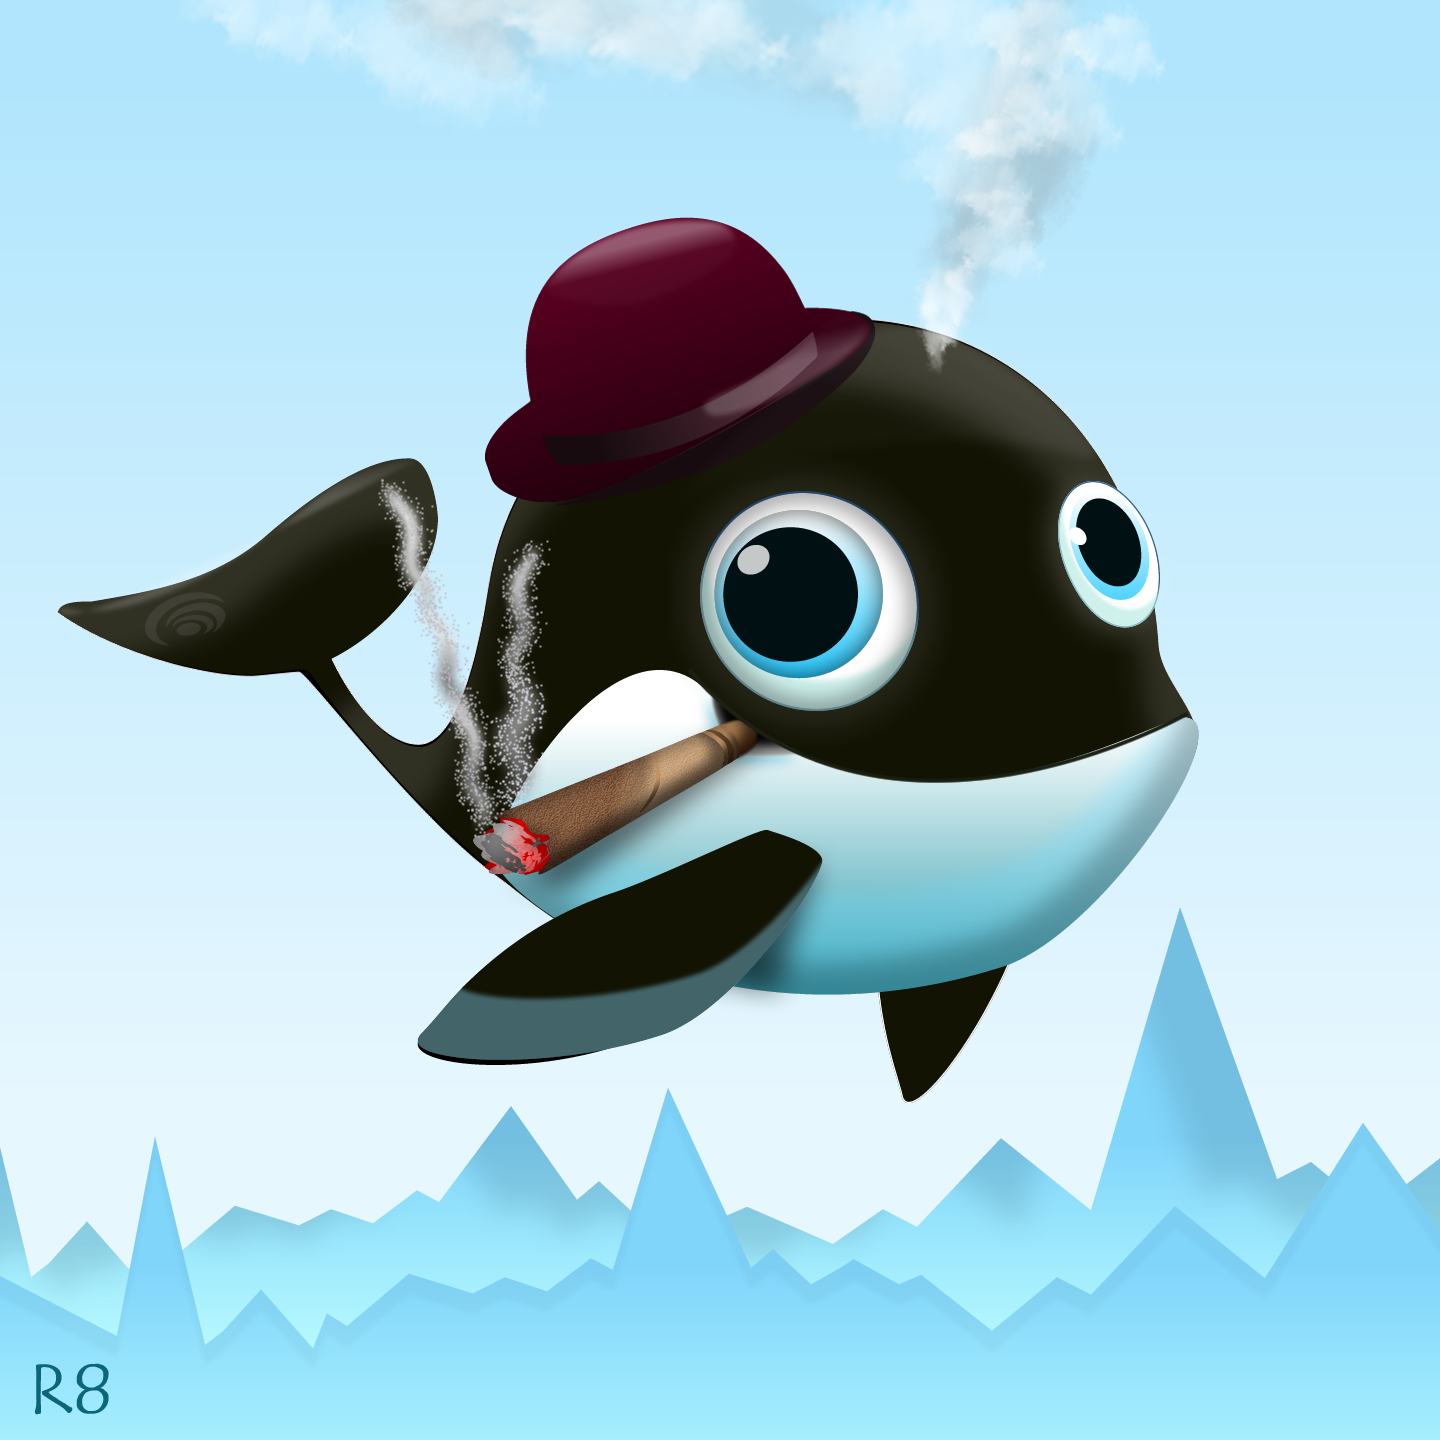 Solsy Whale (8)